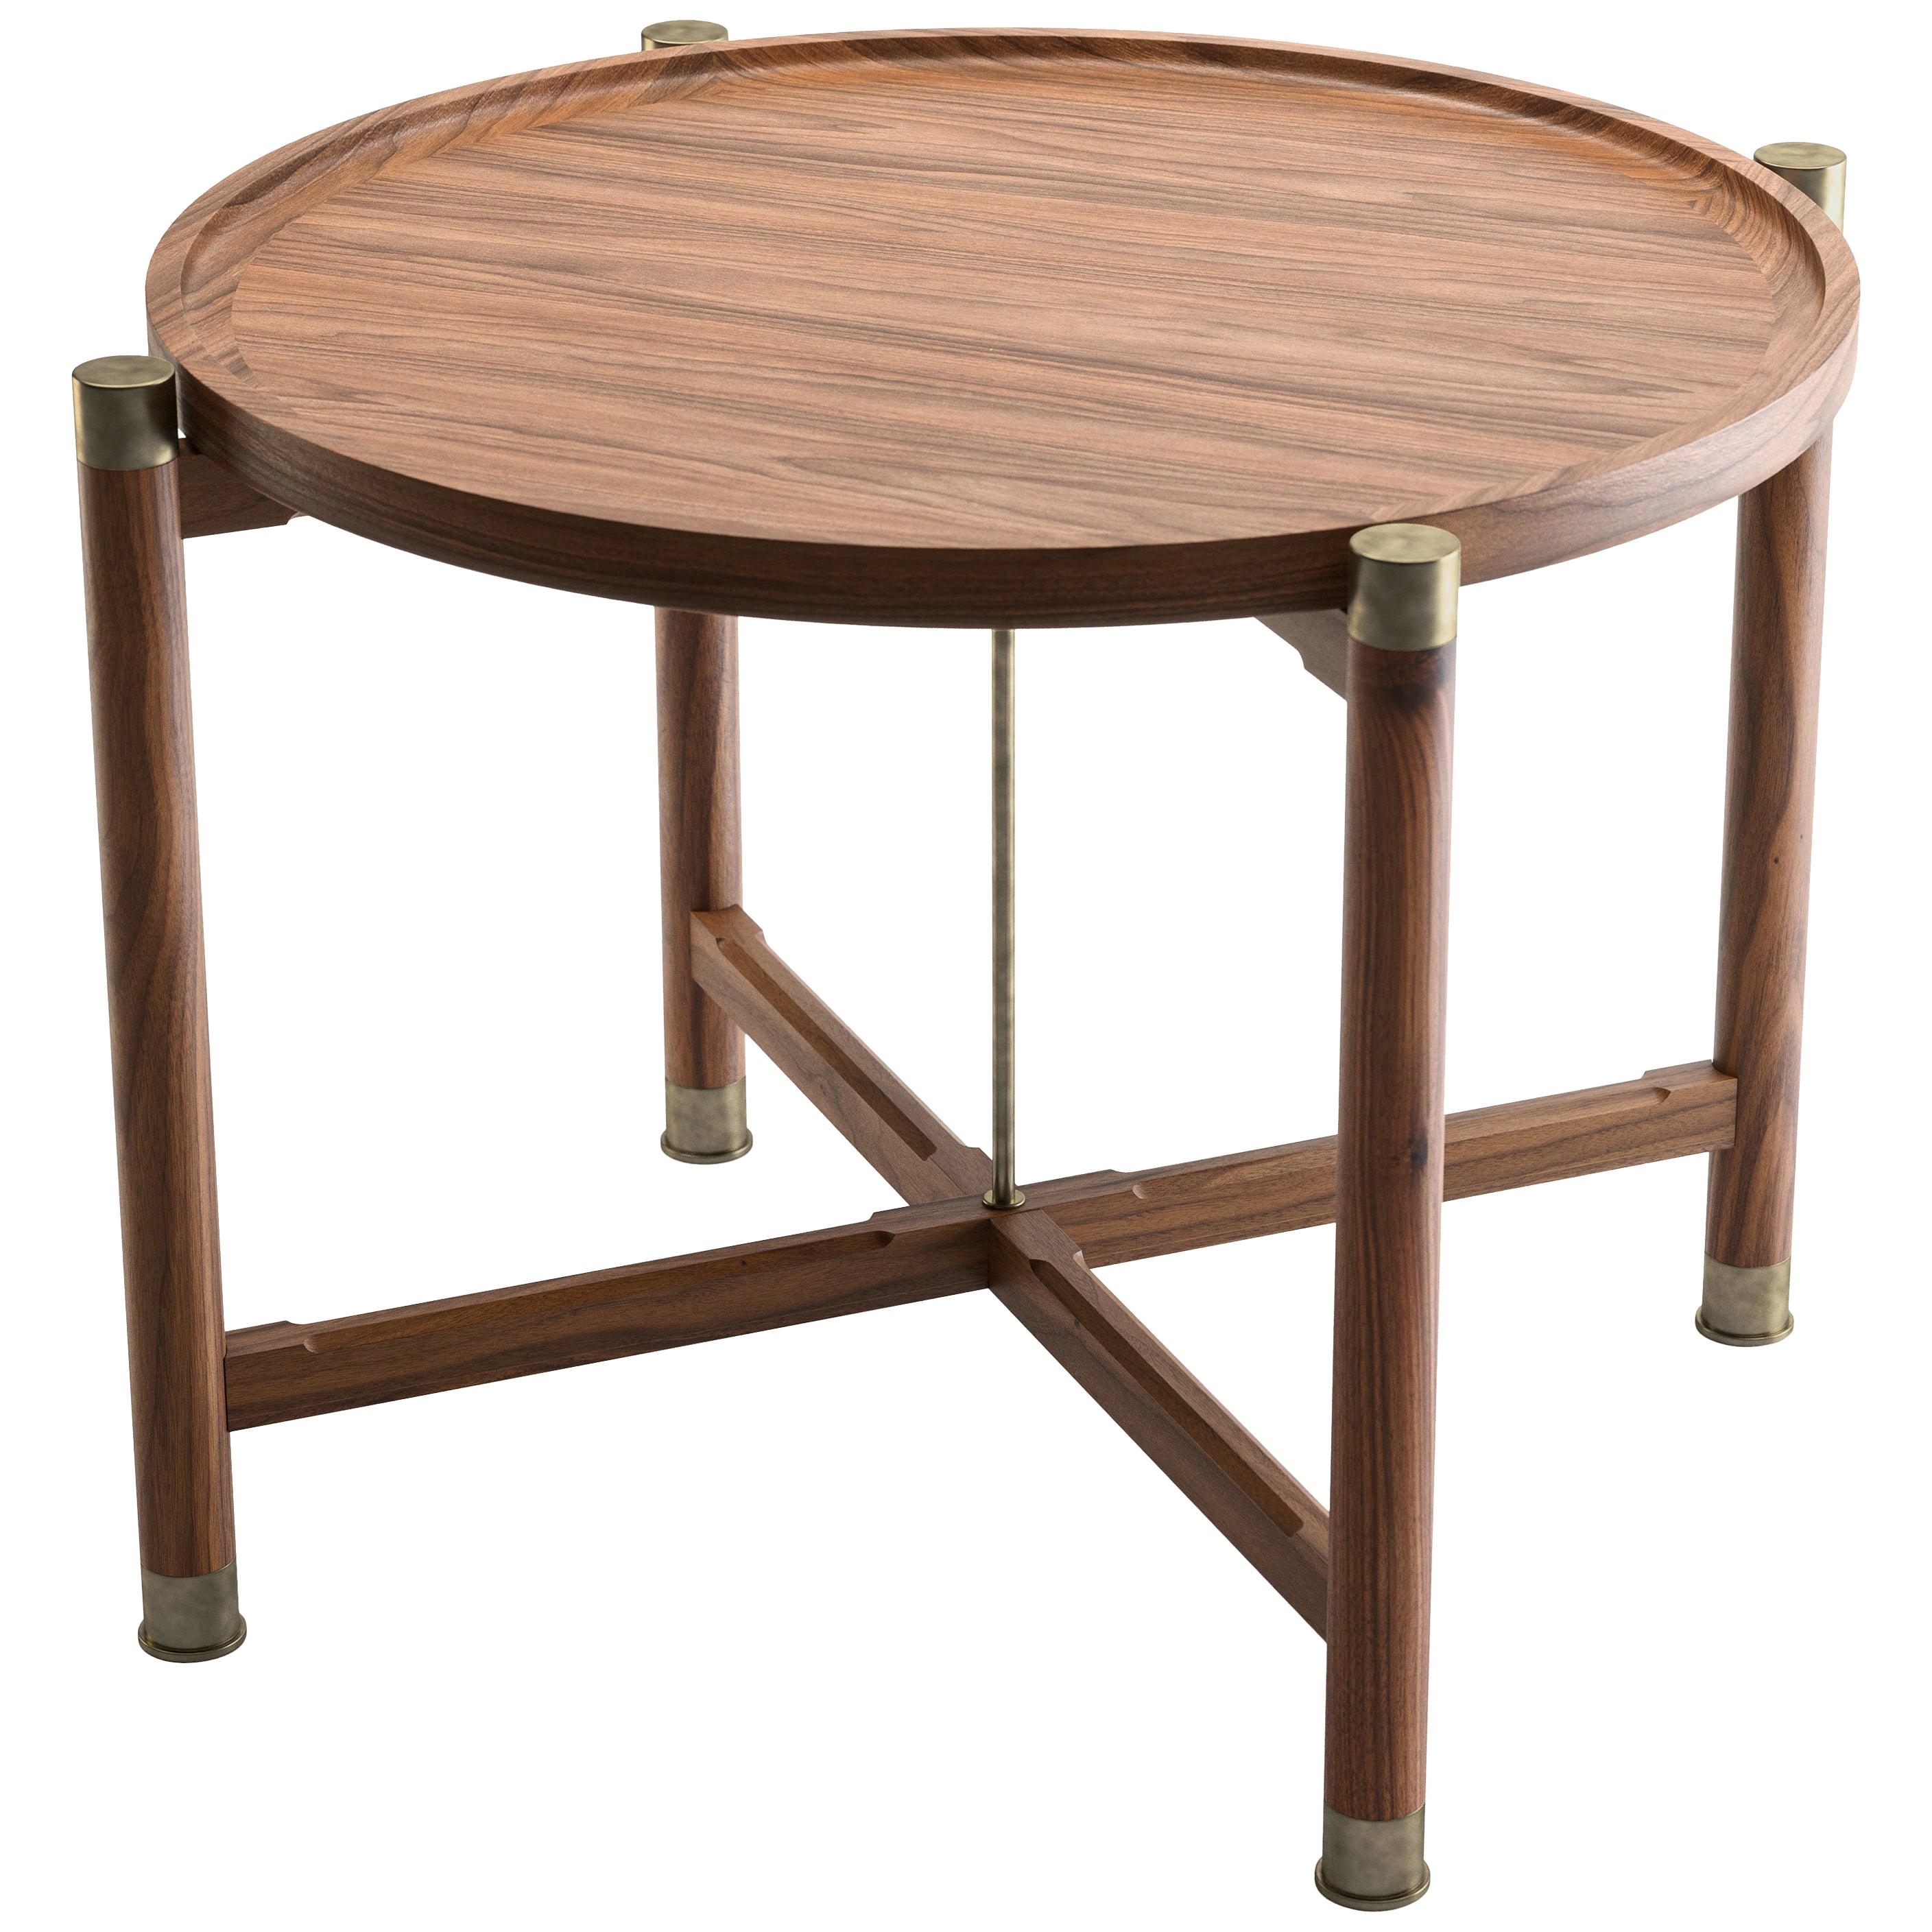 Custom Otto Round Side Table in Lt Walnut with Antique Brass Fittings and Stem